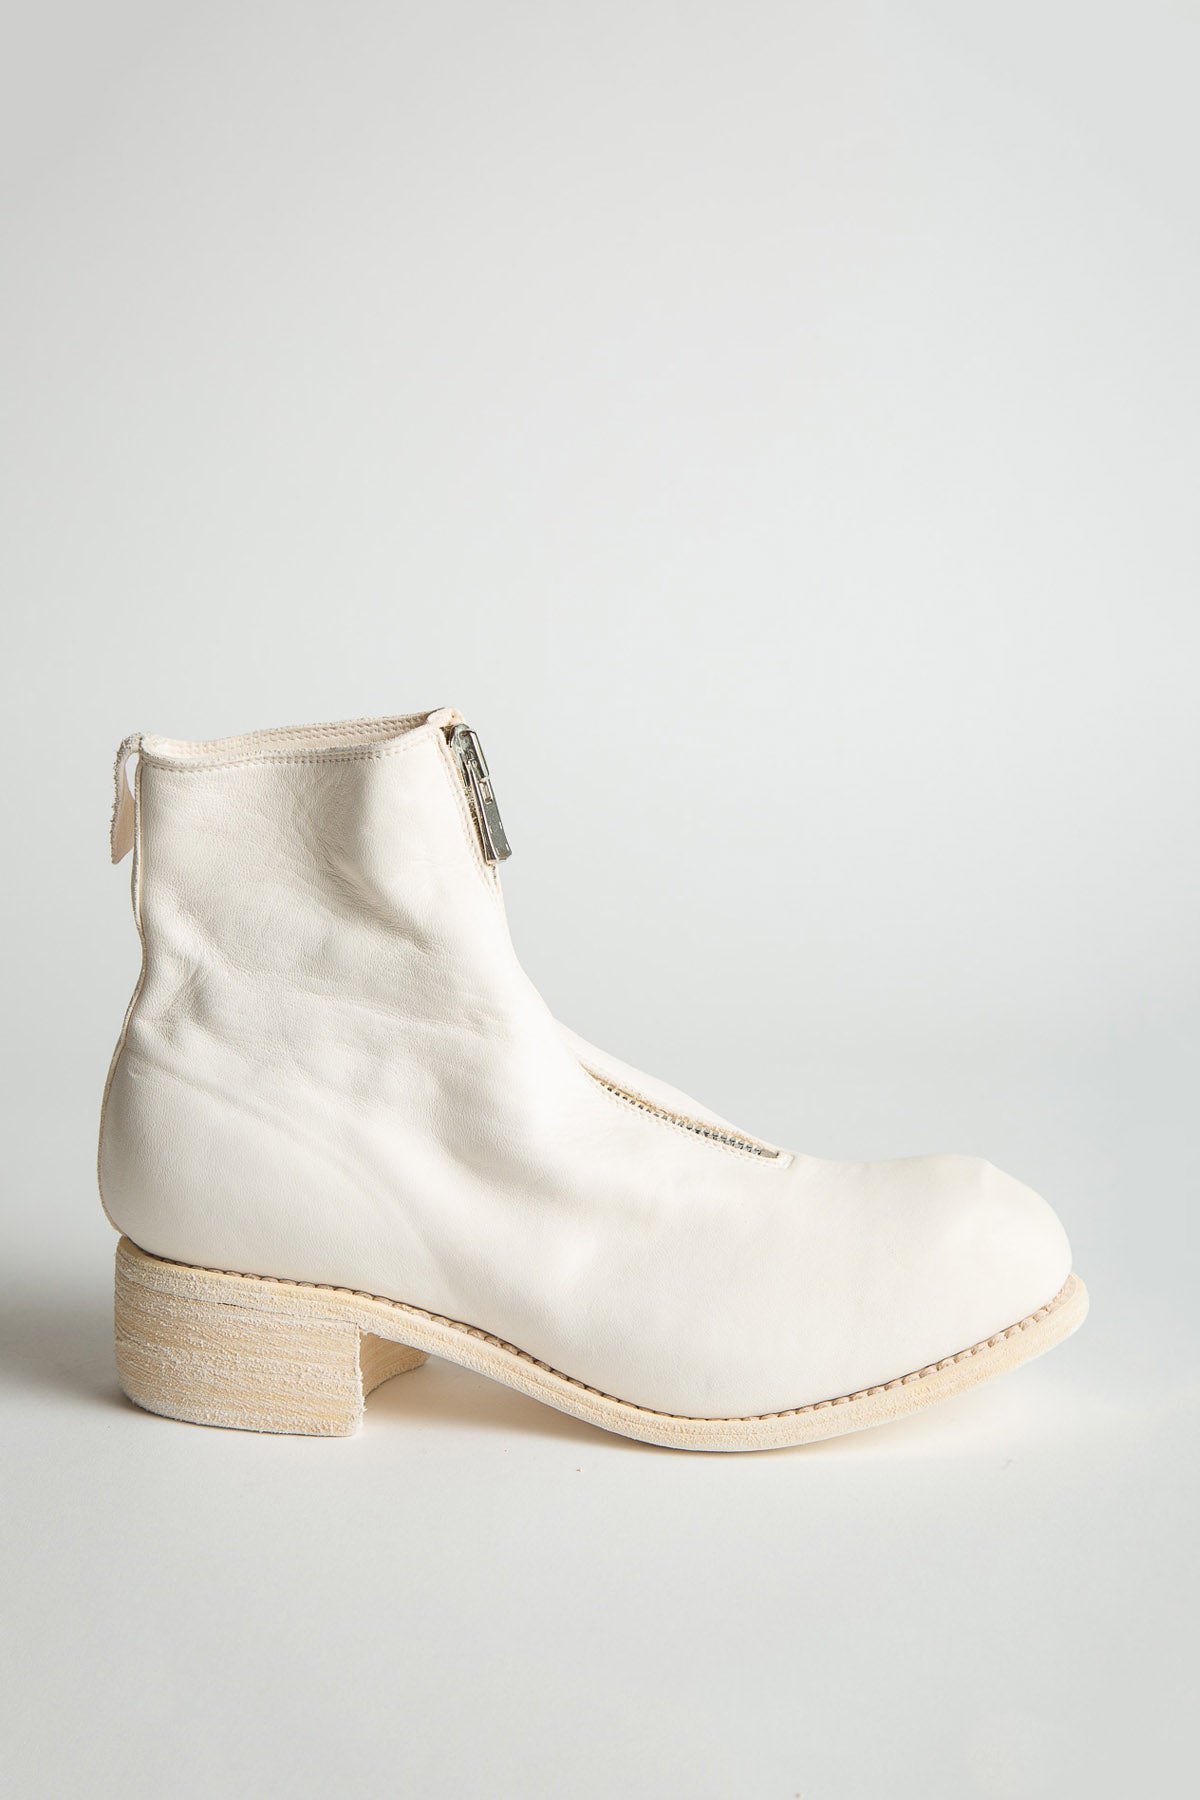 GUIDI | ORTHOPAEDIC FRONT ZIP BOOTS